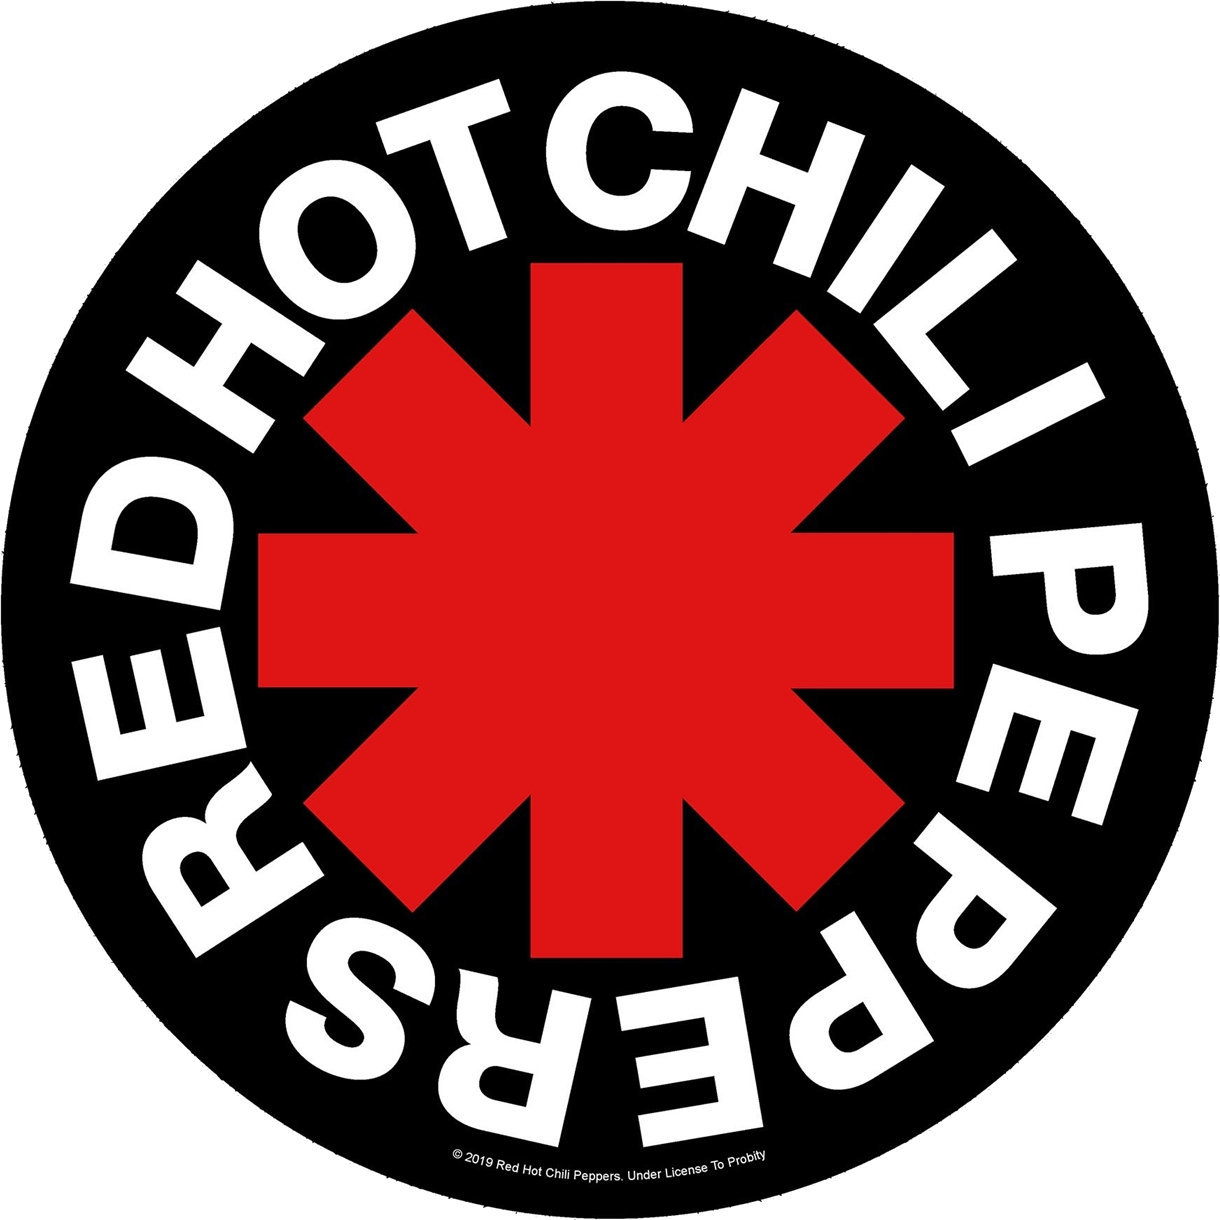 Correctif Red Hot Chili Peppers Asterisk Correctif